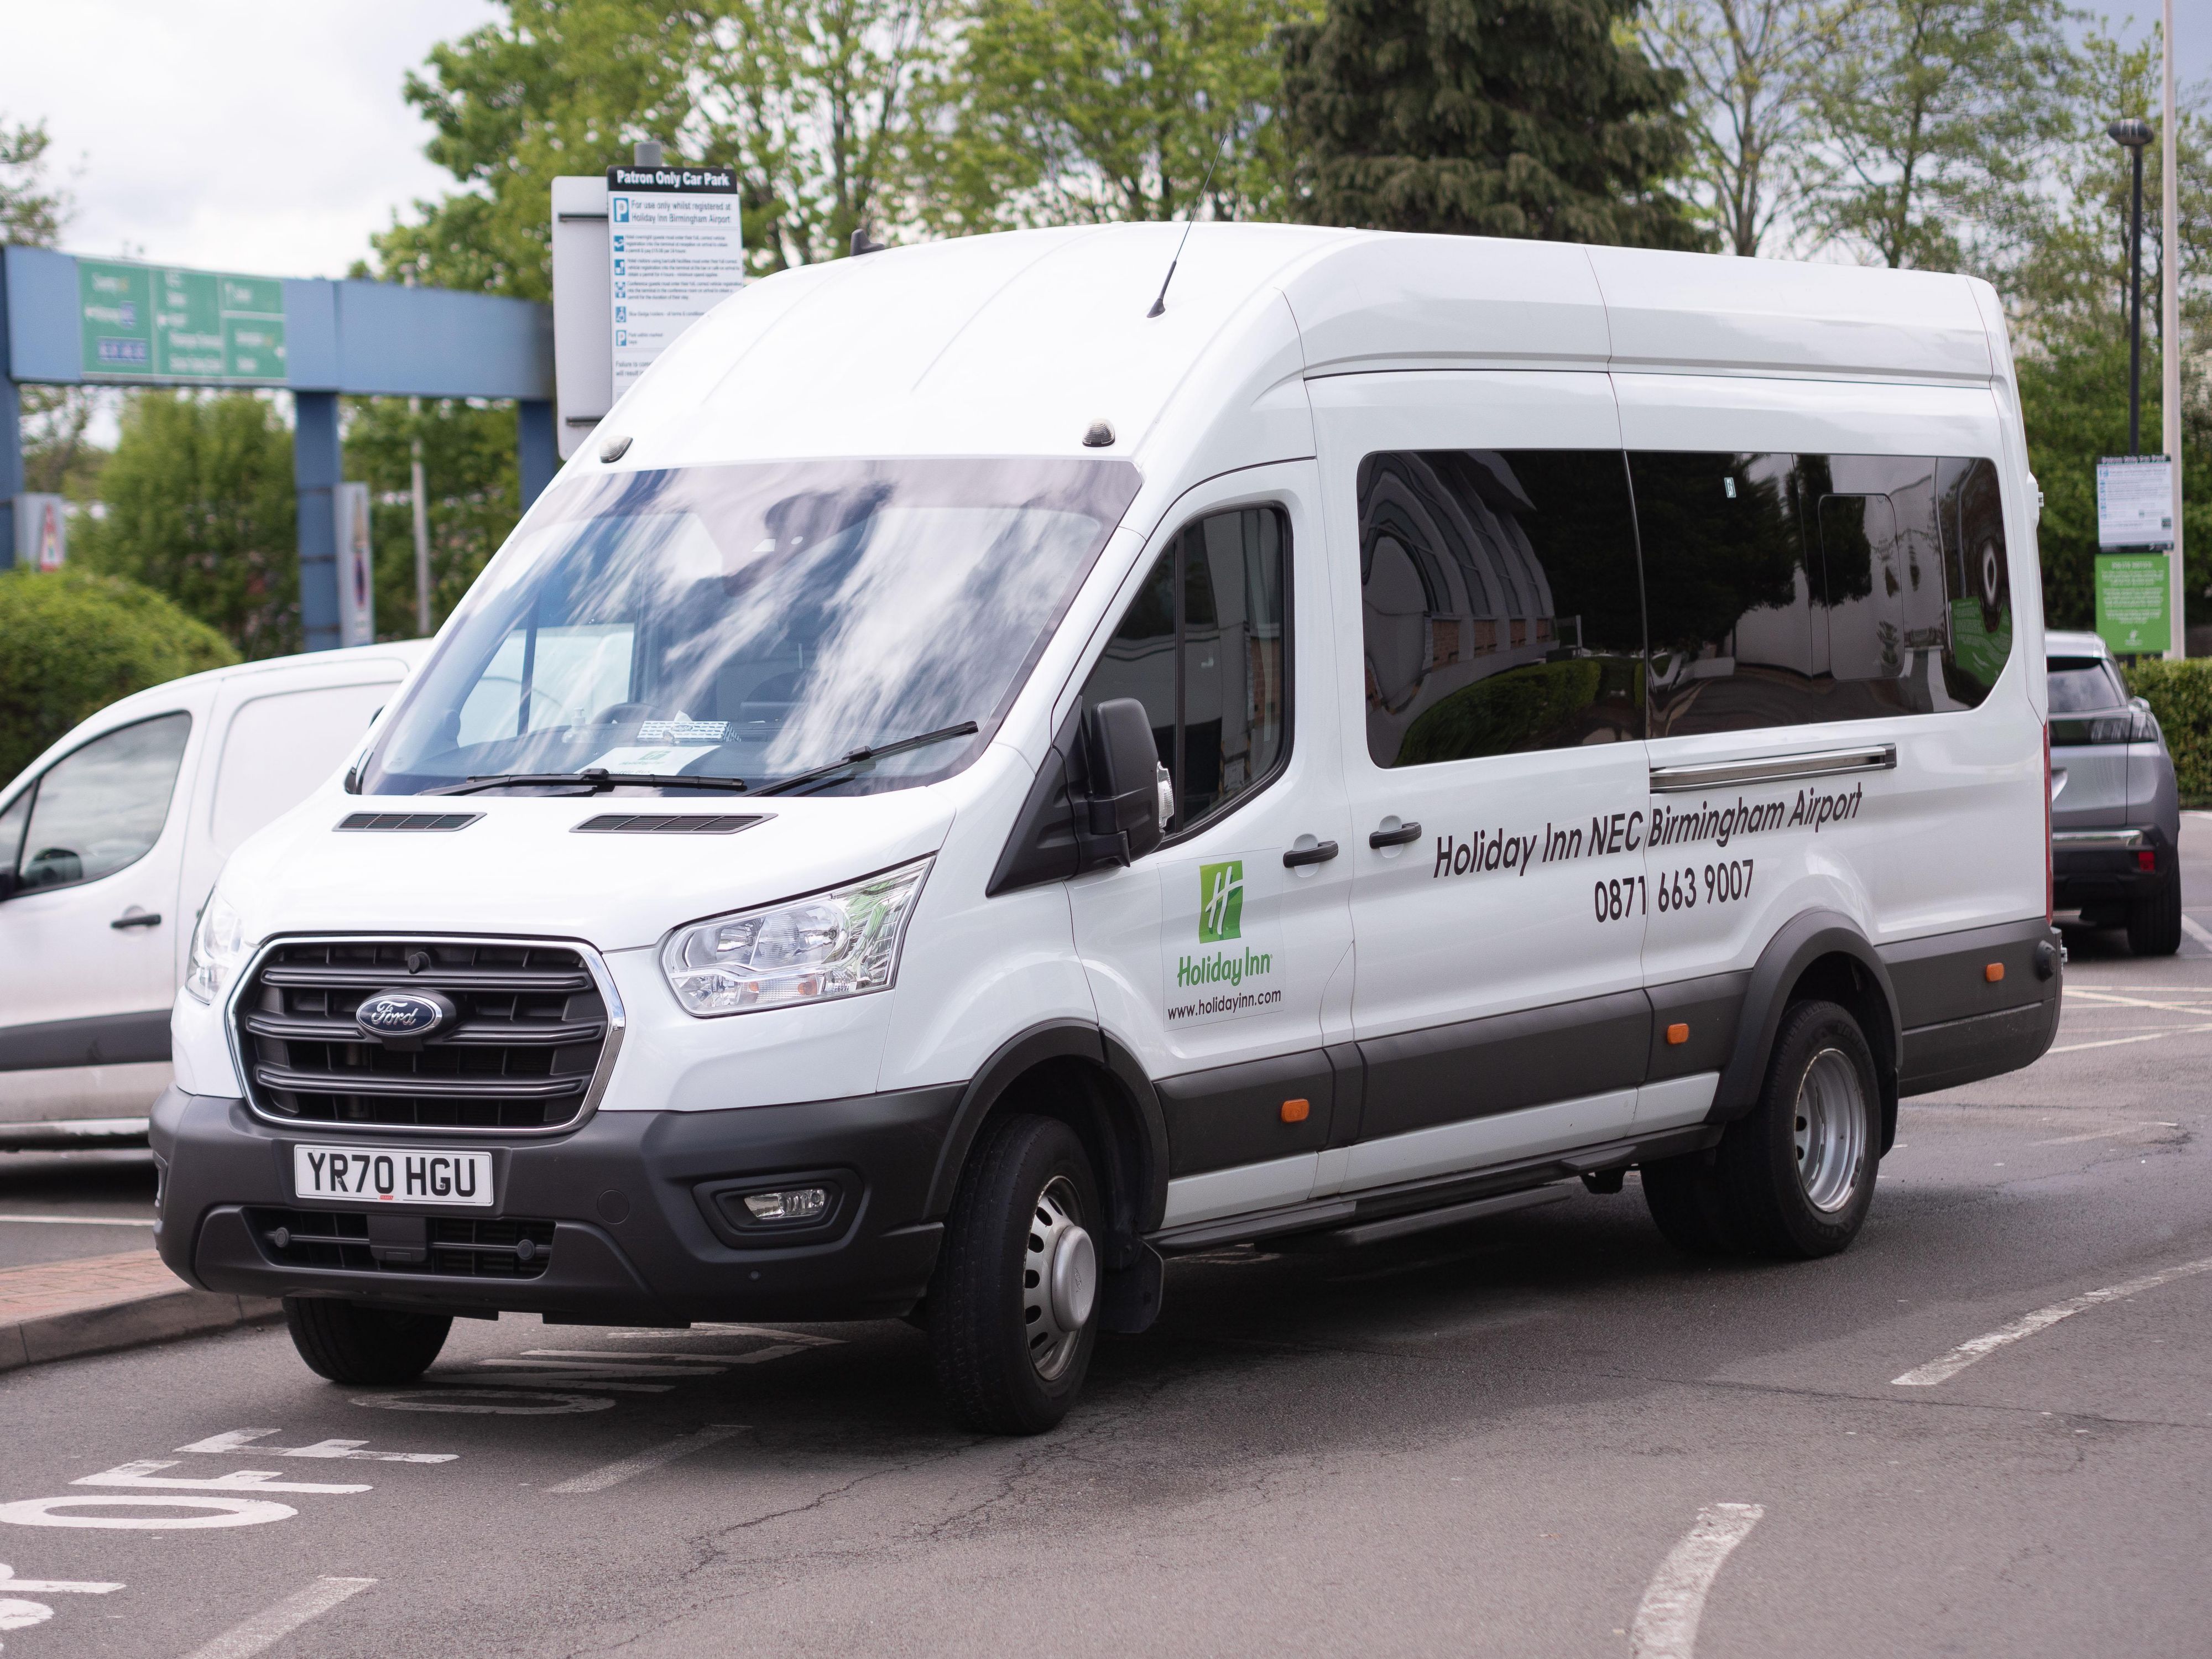 Maximize your convenience with our Complimentary Shuttle Bus Service, available from 05:00 to 23:00. Enjoy seamless transfers to key locations including Birmingham Train Station, The NEC and Resort World. Take advantage of the Free Monorail Connection to the Airport. Click 'Learn More' to get in touch with our team for additional details.